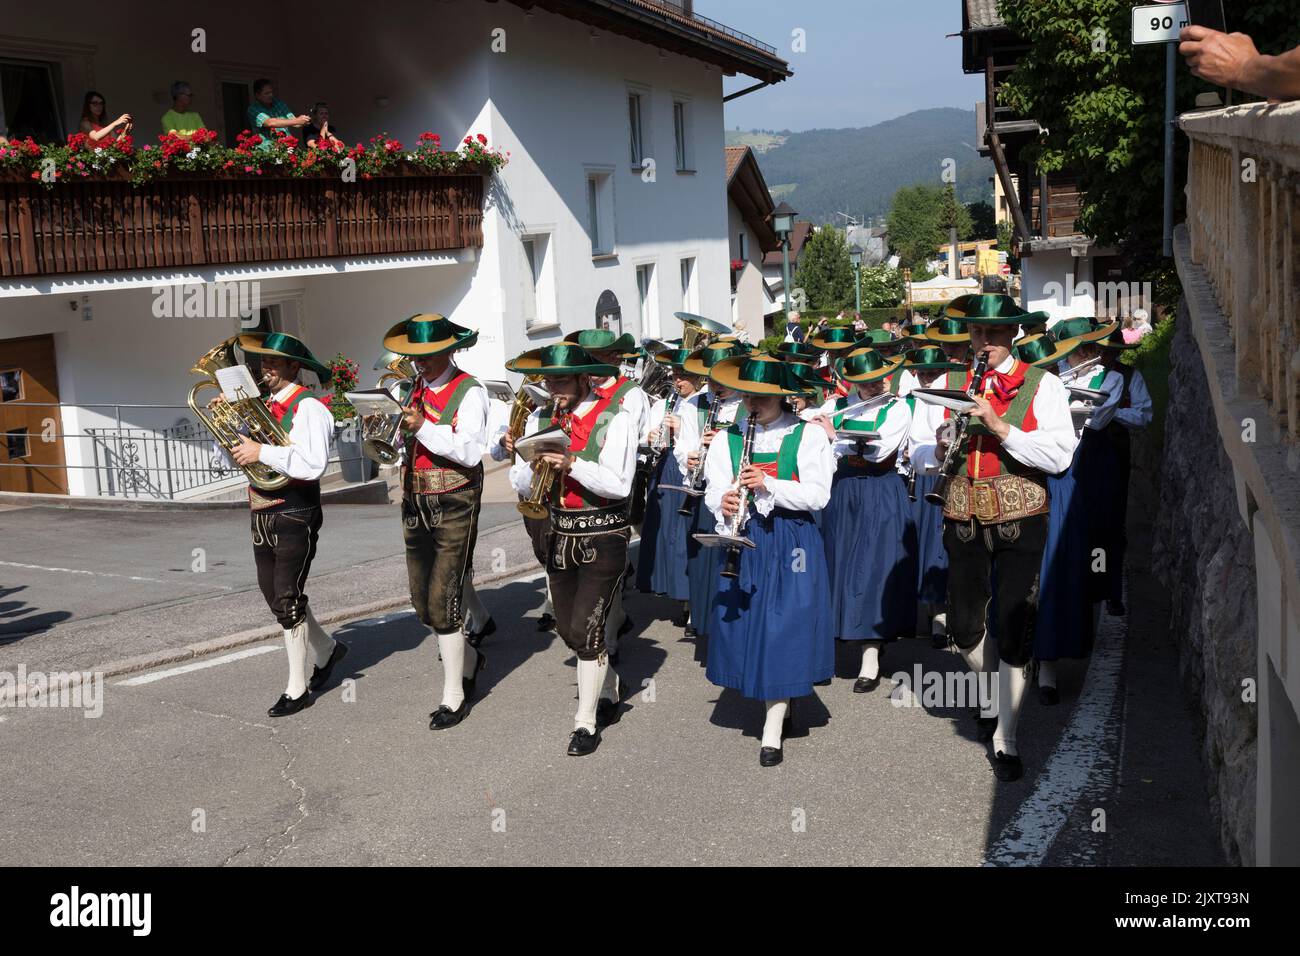 Men and women musicians wearing traditional local period costume of wide brimmed hats and leather breeches or long skirts, take part in a 'Corpus Chri Stock Photo